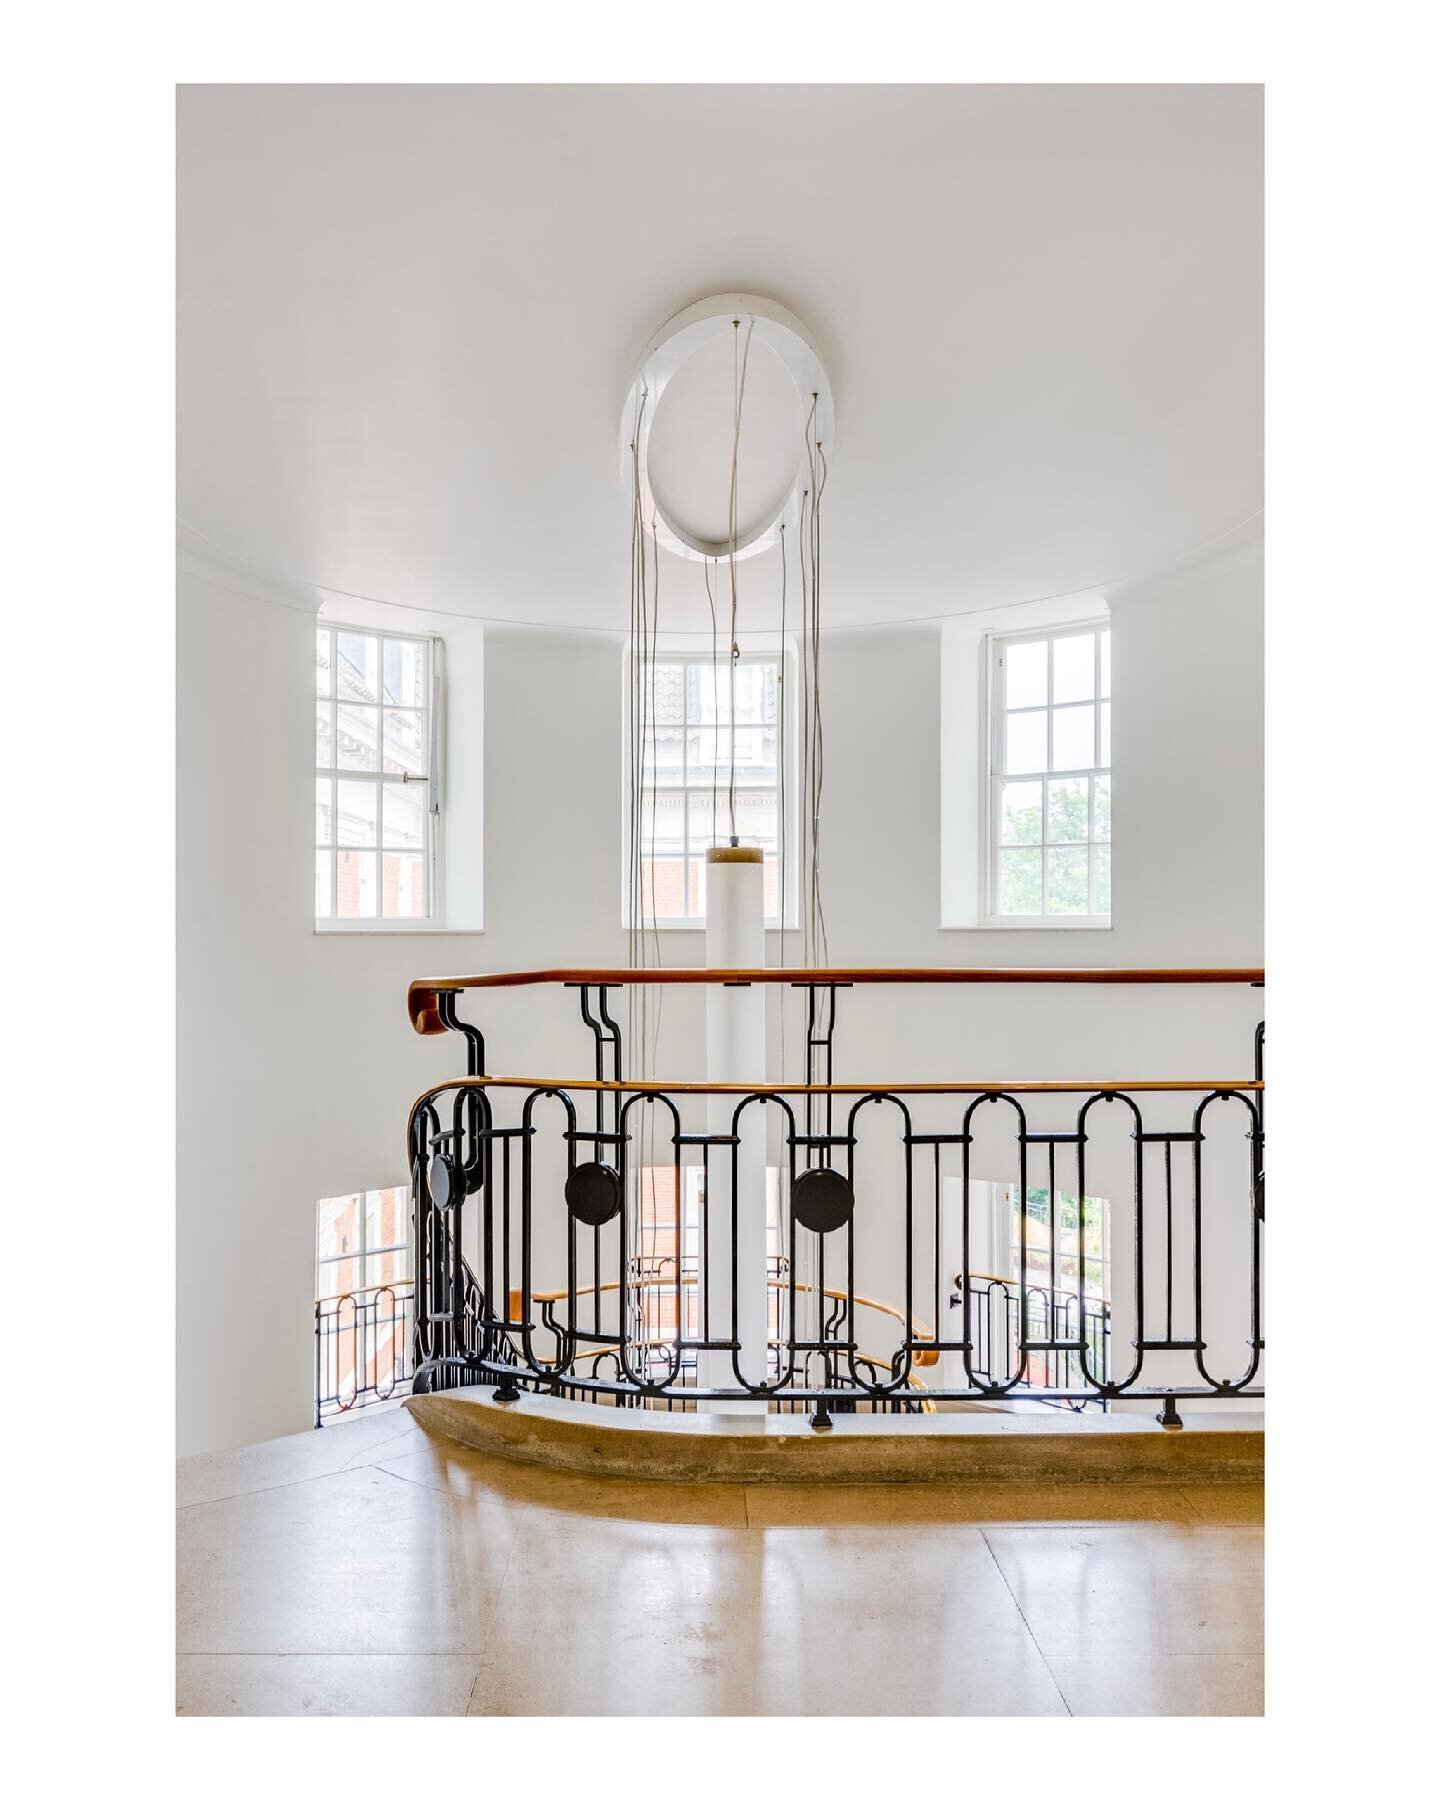 Unbelievable staircase in the Royal Star &amp; Garter Home building in Richmond.

Built in early 1920&rsquo;s and still looking incredible with restoration from @londonsquaredevelopments.
&bull;
&bull;
#interiorphotography #interiordesign #agameofton